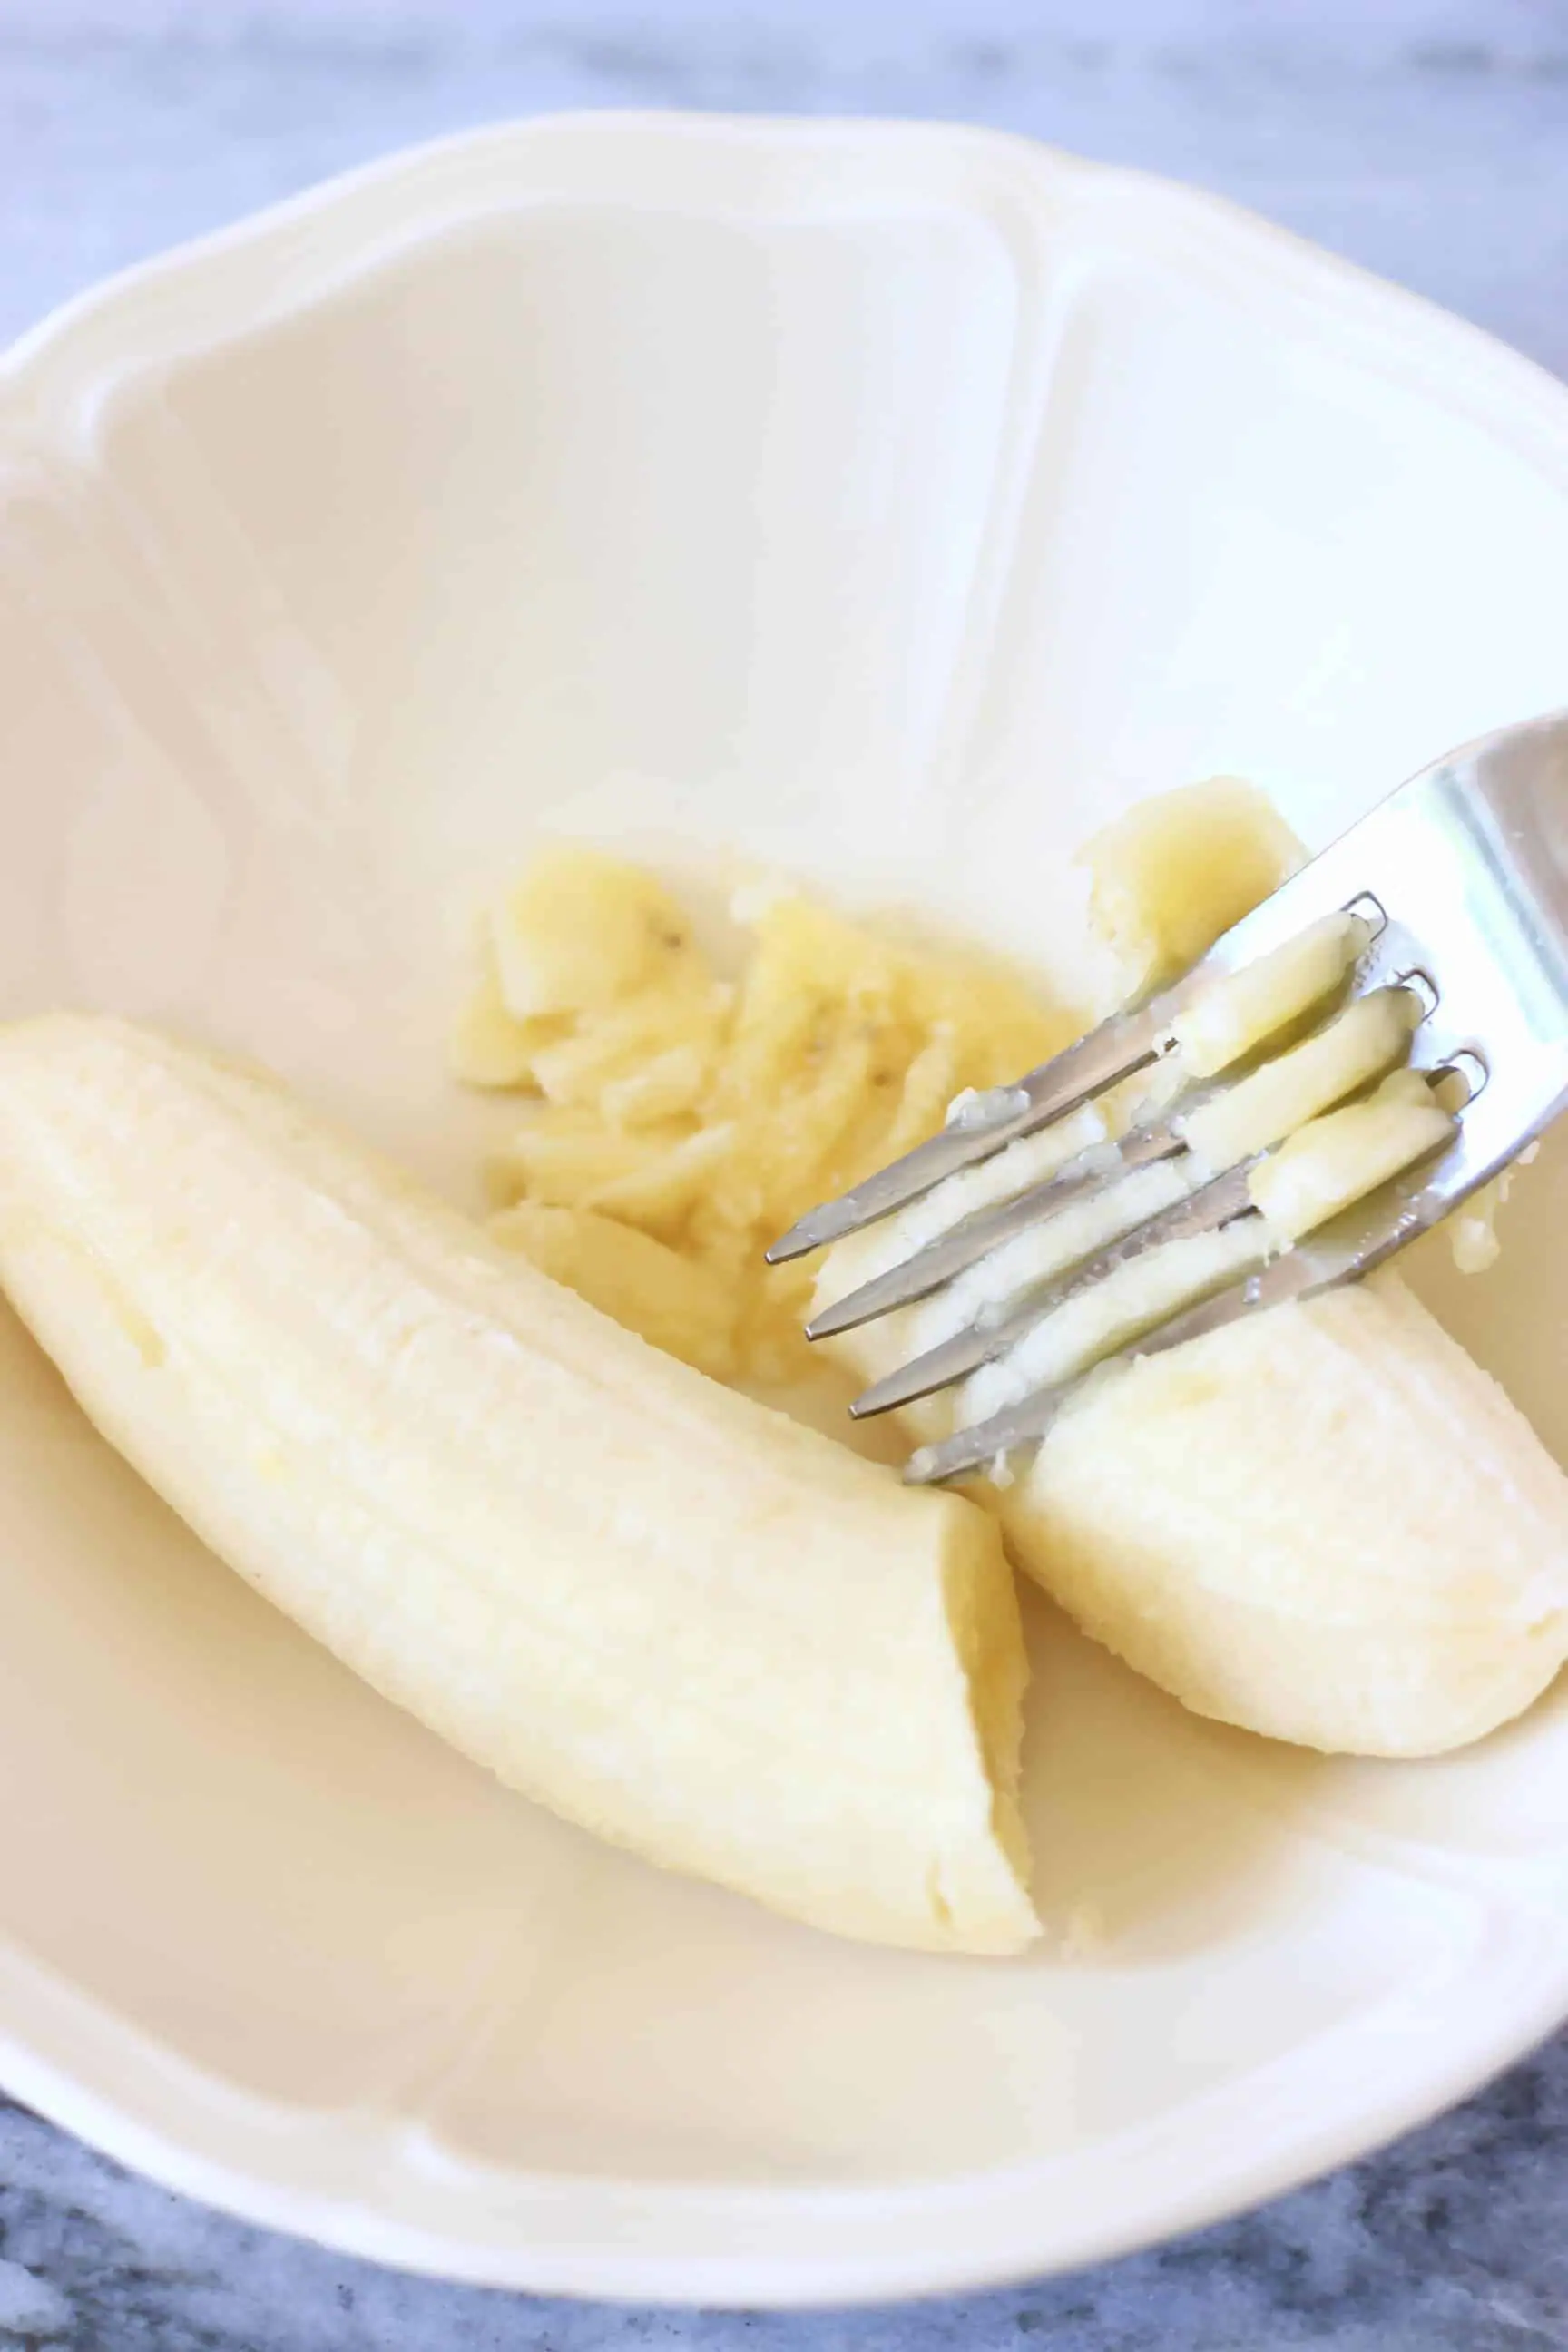 A banana in a white bowl being mashed with a silver fork